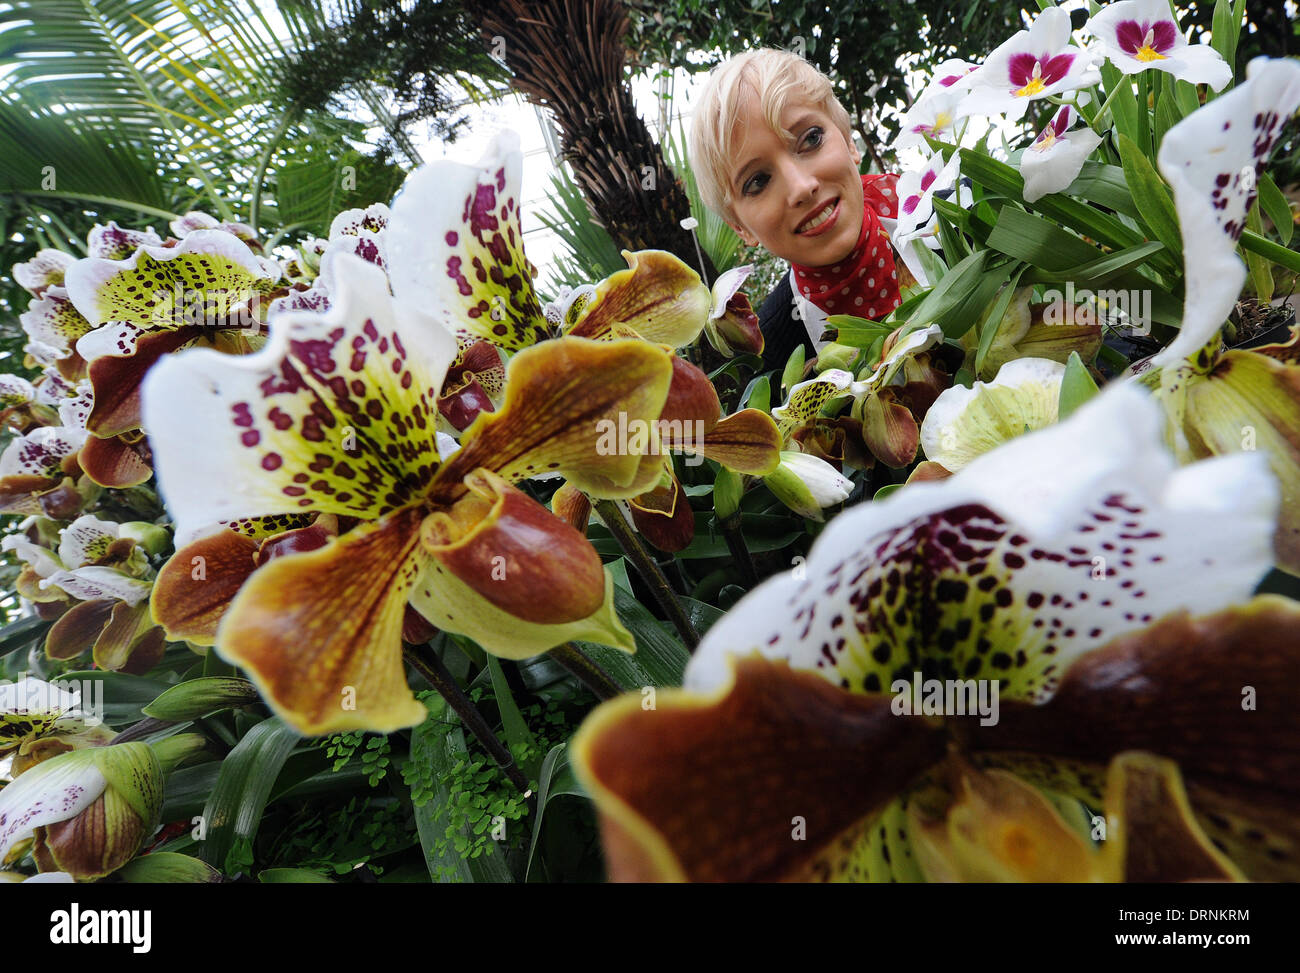 Hanover, Germany. 30th Jan, 2014. Sarah presents lady's-slipper orchids (front) and a Miltonia Orchid (R top) in the tropical glasshouses of the Berggarten botanical garden in Hanover, Germany, 30 January 2014. The exotic plants belong to around 2,000 different exhibits that are on display in the special show 'Lady's slippers - the most beautiful shoes in the world', which takes place from 31 January until 28 February 2014. Photo: HOLGER HOLLEMANN/dpa/Alamy Live News Stock Photo